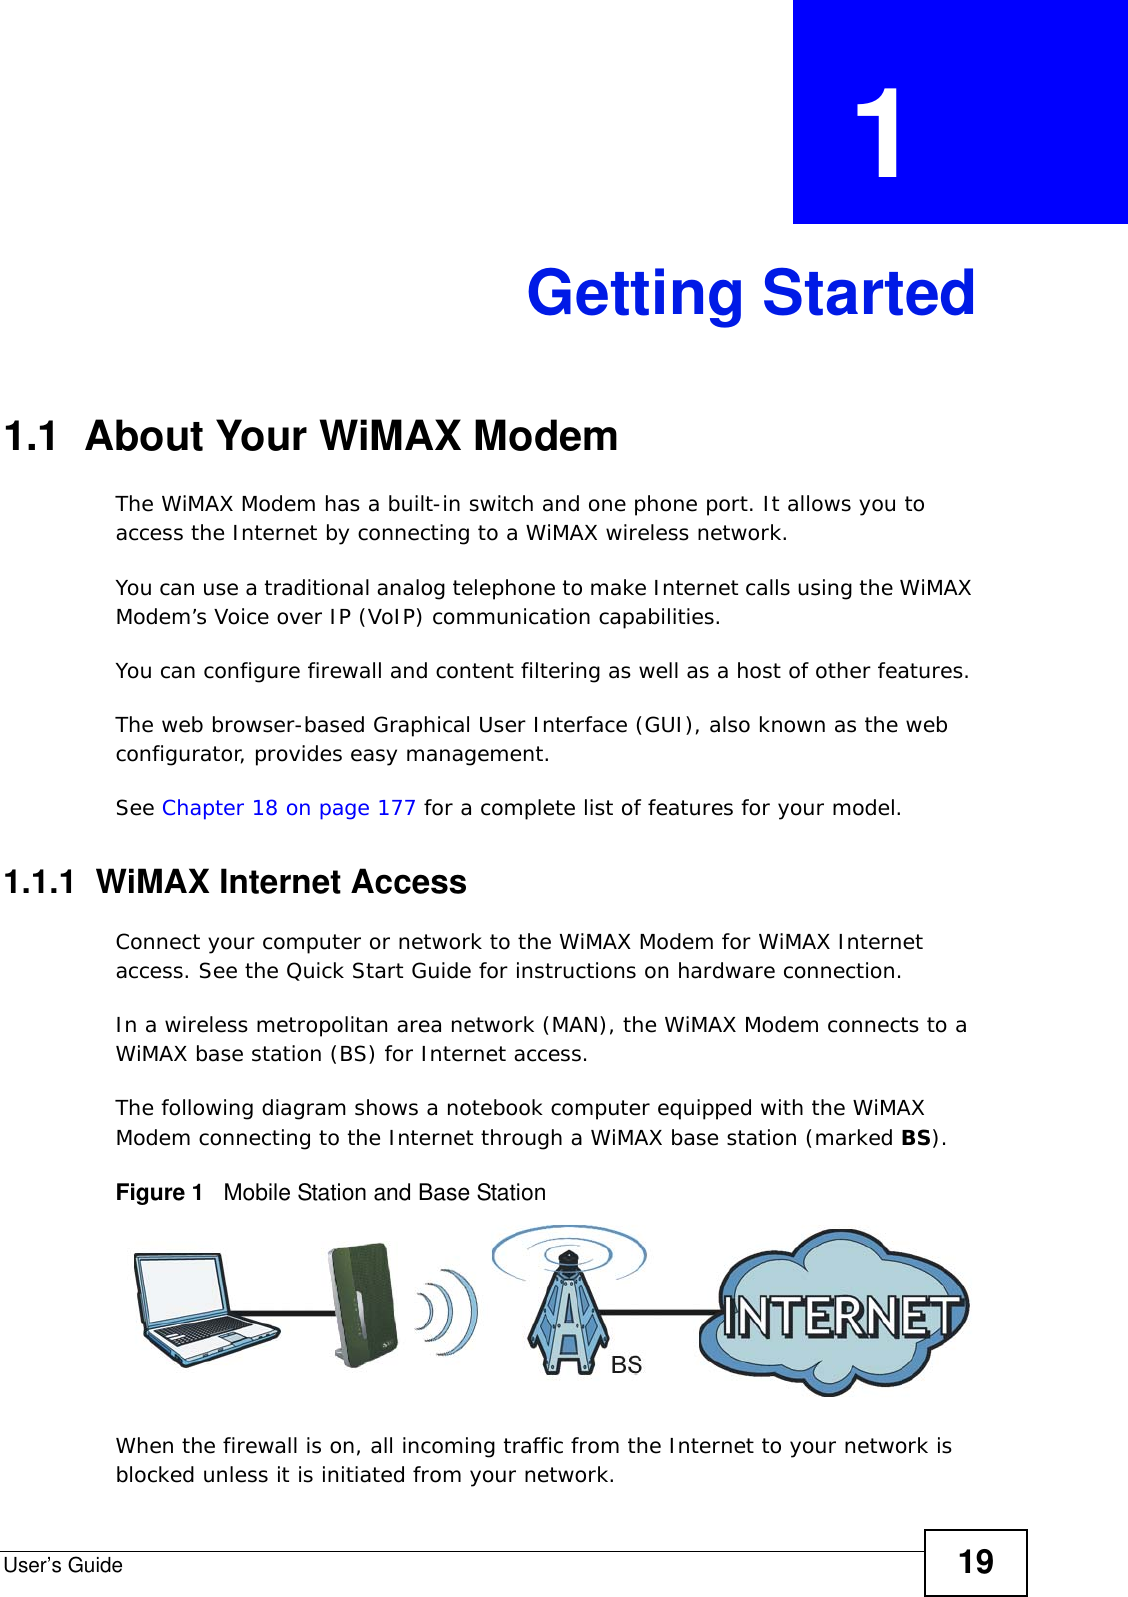 User’s Guide 19CHAPTER  1 Getting Started1.1  About Your WiMAX Modem The WiMAX Modem has a built-in switch and one phone port. It allows you to access the Internet by connecting to a WiMAX wireless network. You can use a traditional analog telephone to make Internet calls using the WiMAX Modem’s Voice over IP (VoIP) communication capabilities. You can configure firewall and content filtering as well as a host of other features. The web browser-based Graphical User Interface (GUI), also known as the web configurator, provides easy management.See Chapter 18 on page 177 for a complete list of features for your model.1.1.1  WiMAX Internet AccessConnect your computer or network to the WiMAX Modem for WiMAX Internet access. See the Quick Start Guide for instructions on hardware connection.In a wireless metropolitan area network (MAN), the WiMAX Modem connects to a WiMAX base station (BS) for Internet access. The following diagram shows a notebook computer equipped with the WiMAX Modem connecting to the Internet through a WiMAX base station (marked BS).Figure 1   Mobile Station and Base StationWhen the firewall is on, all incoming traffic from the Internet to your network is blocked unless it is initiated from your network. 